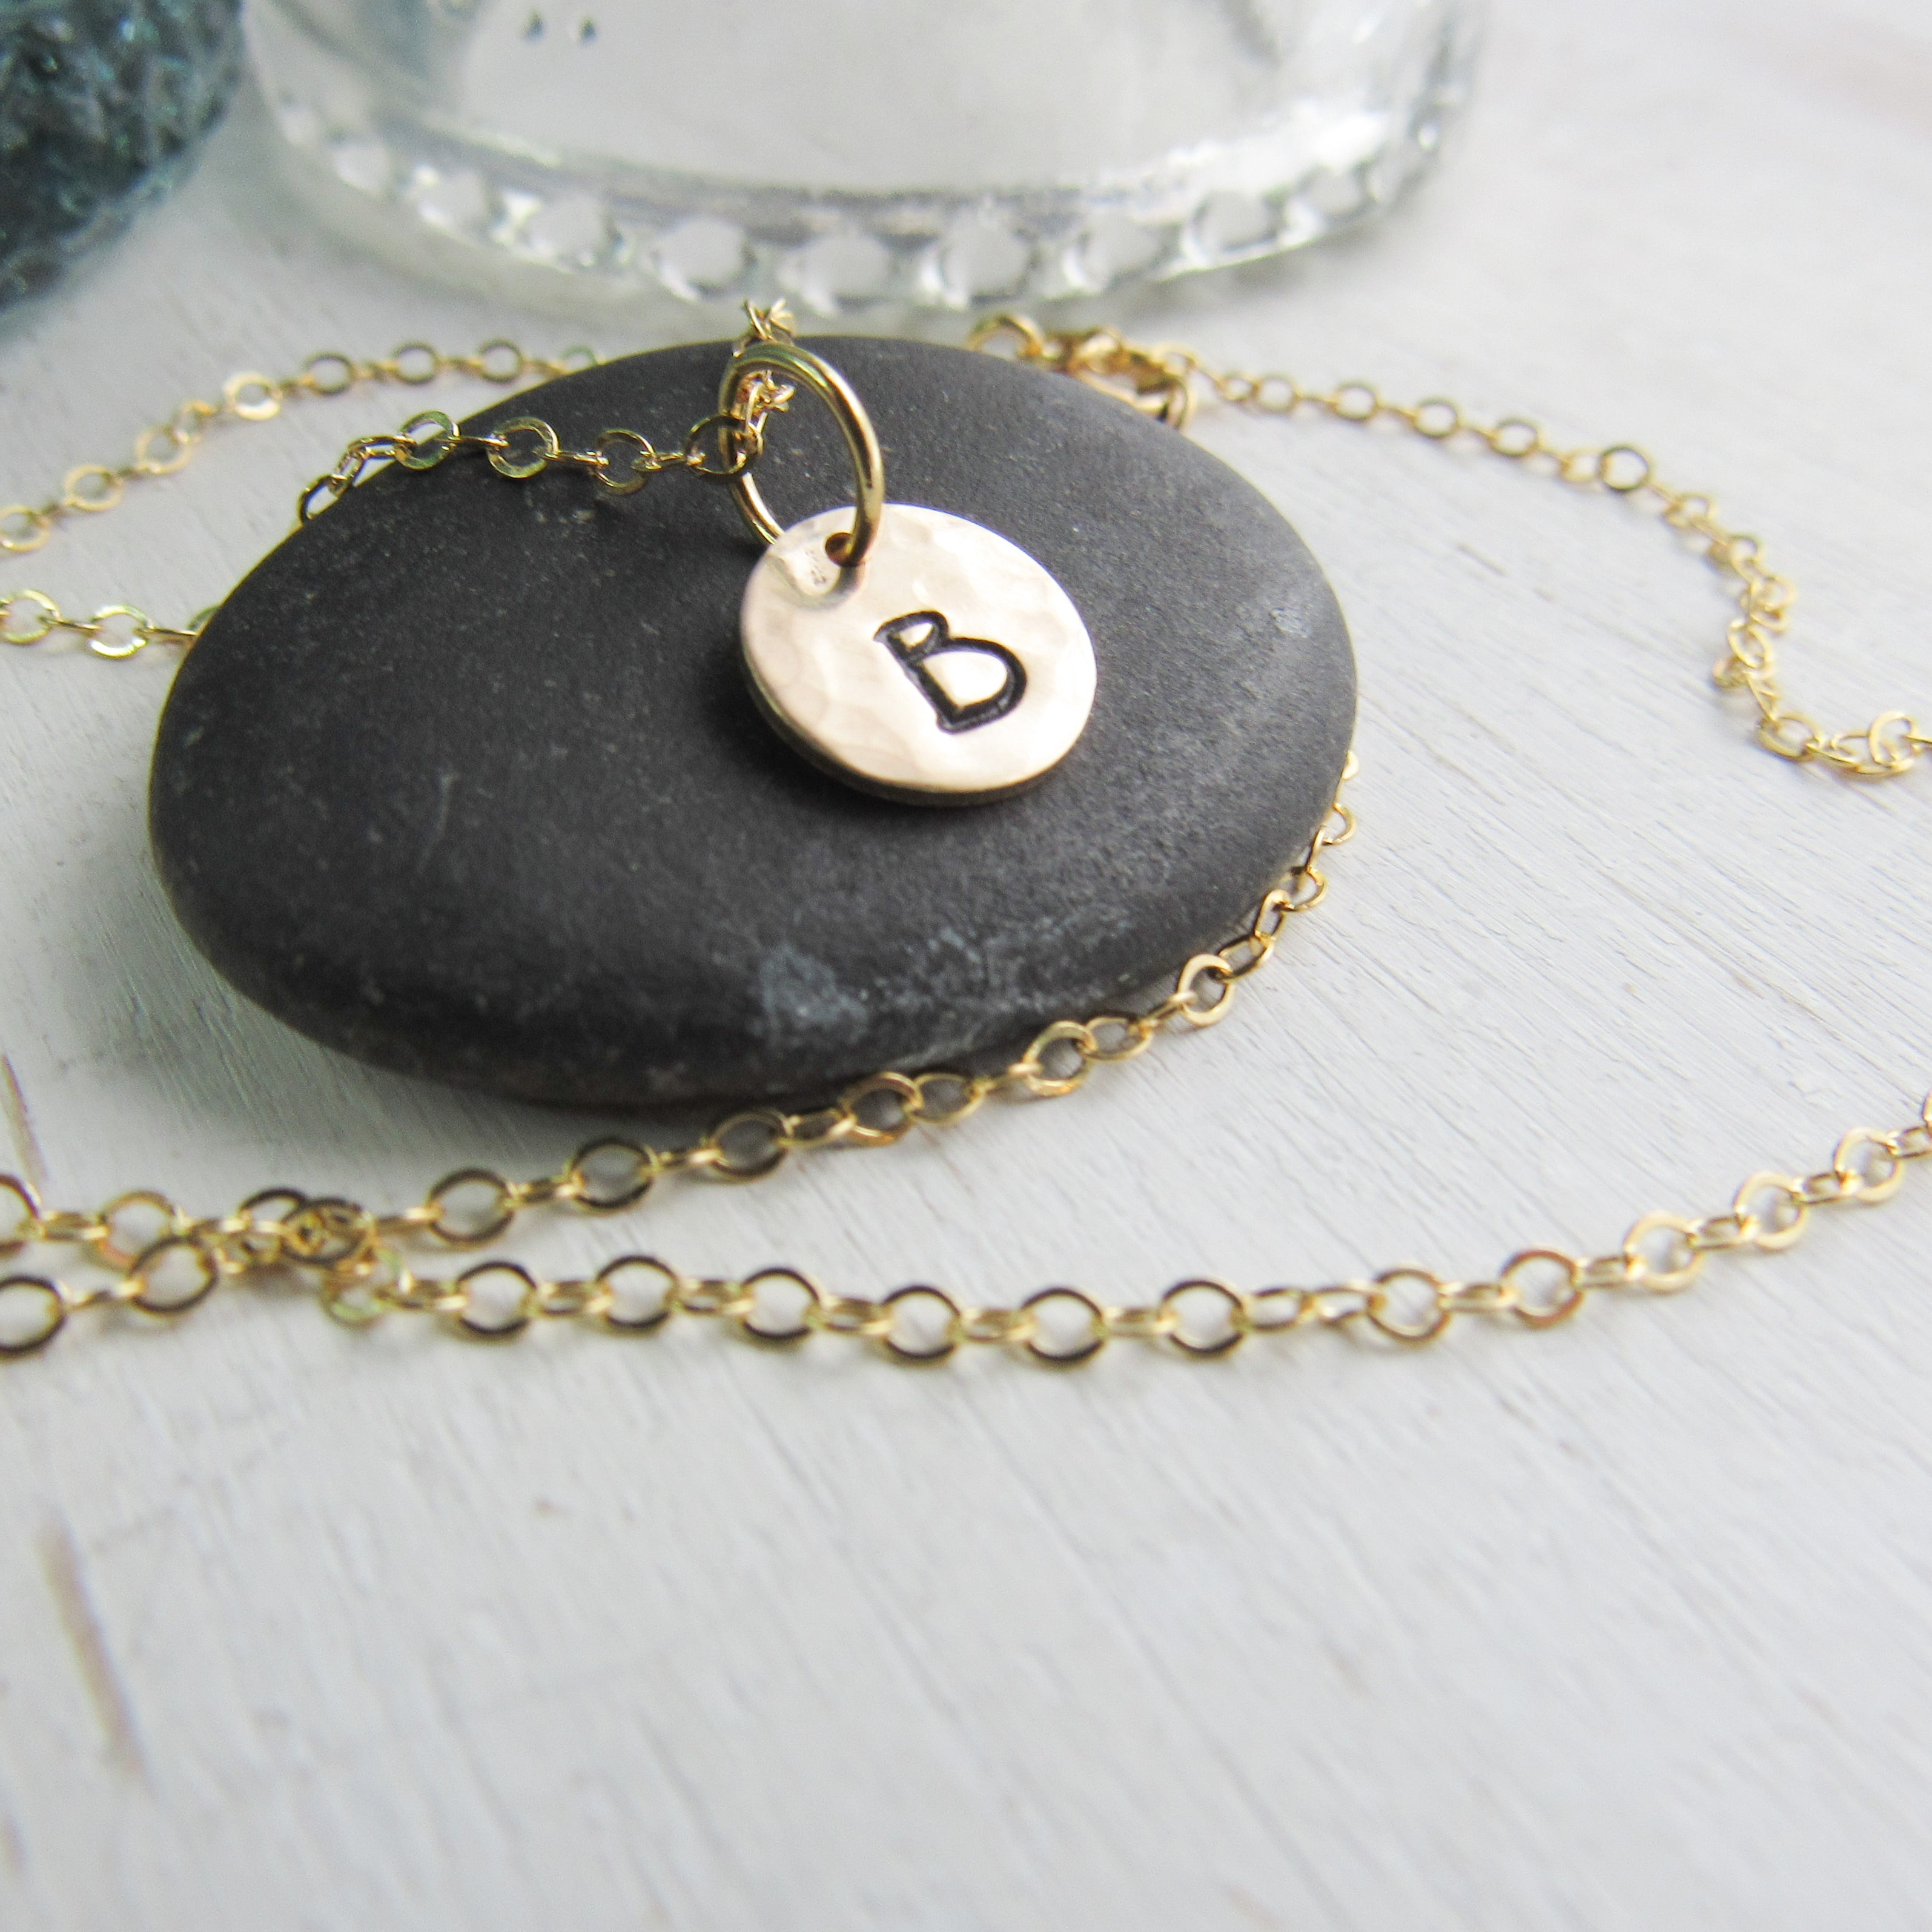 14K Gold filled keepsake charm necklace. Small charms are textured and stamped with the letters that mean the most to your heart. 